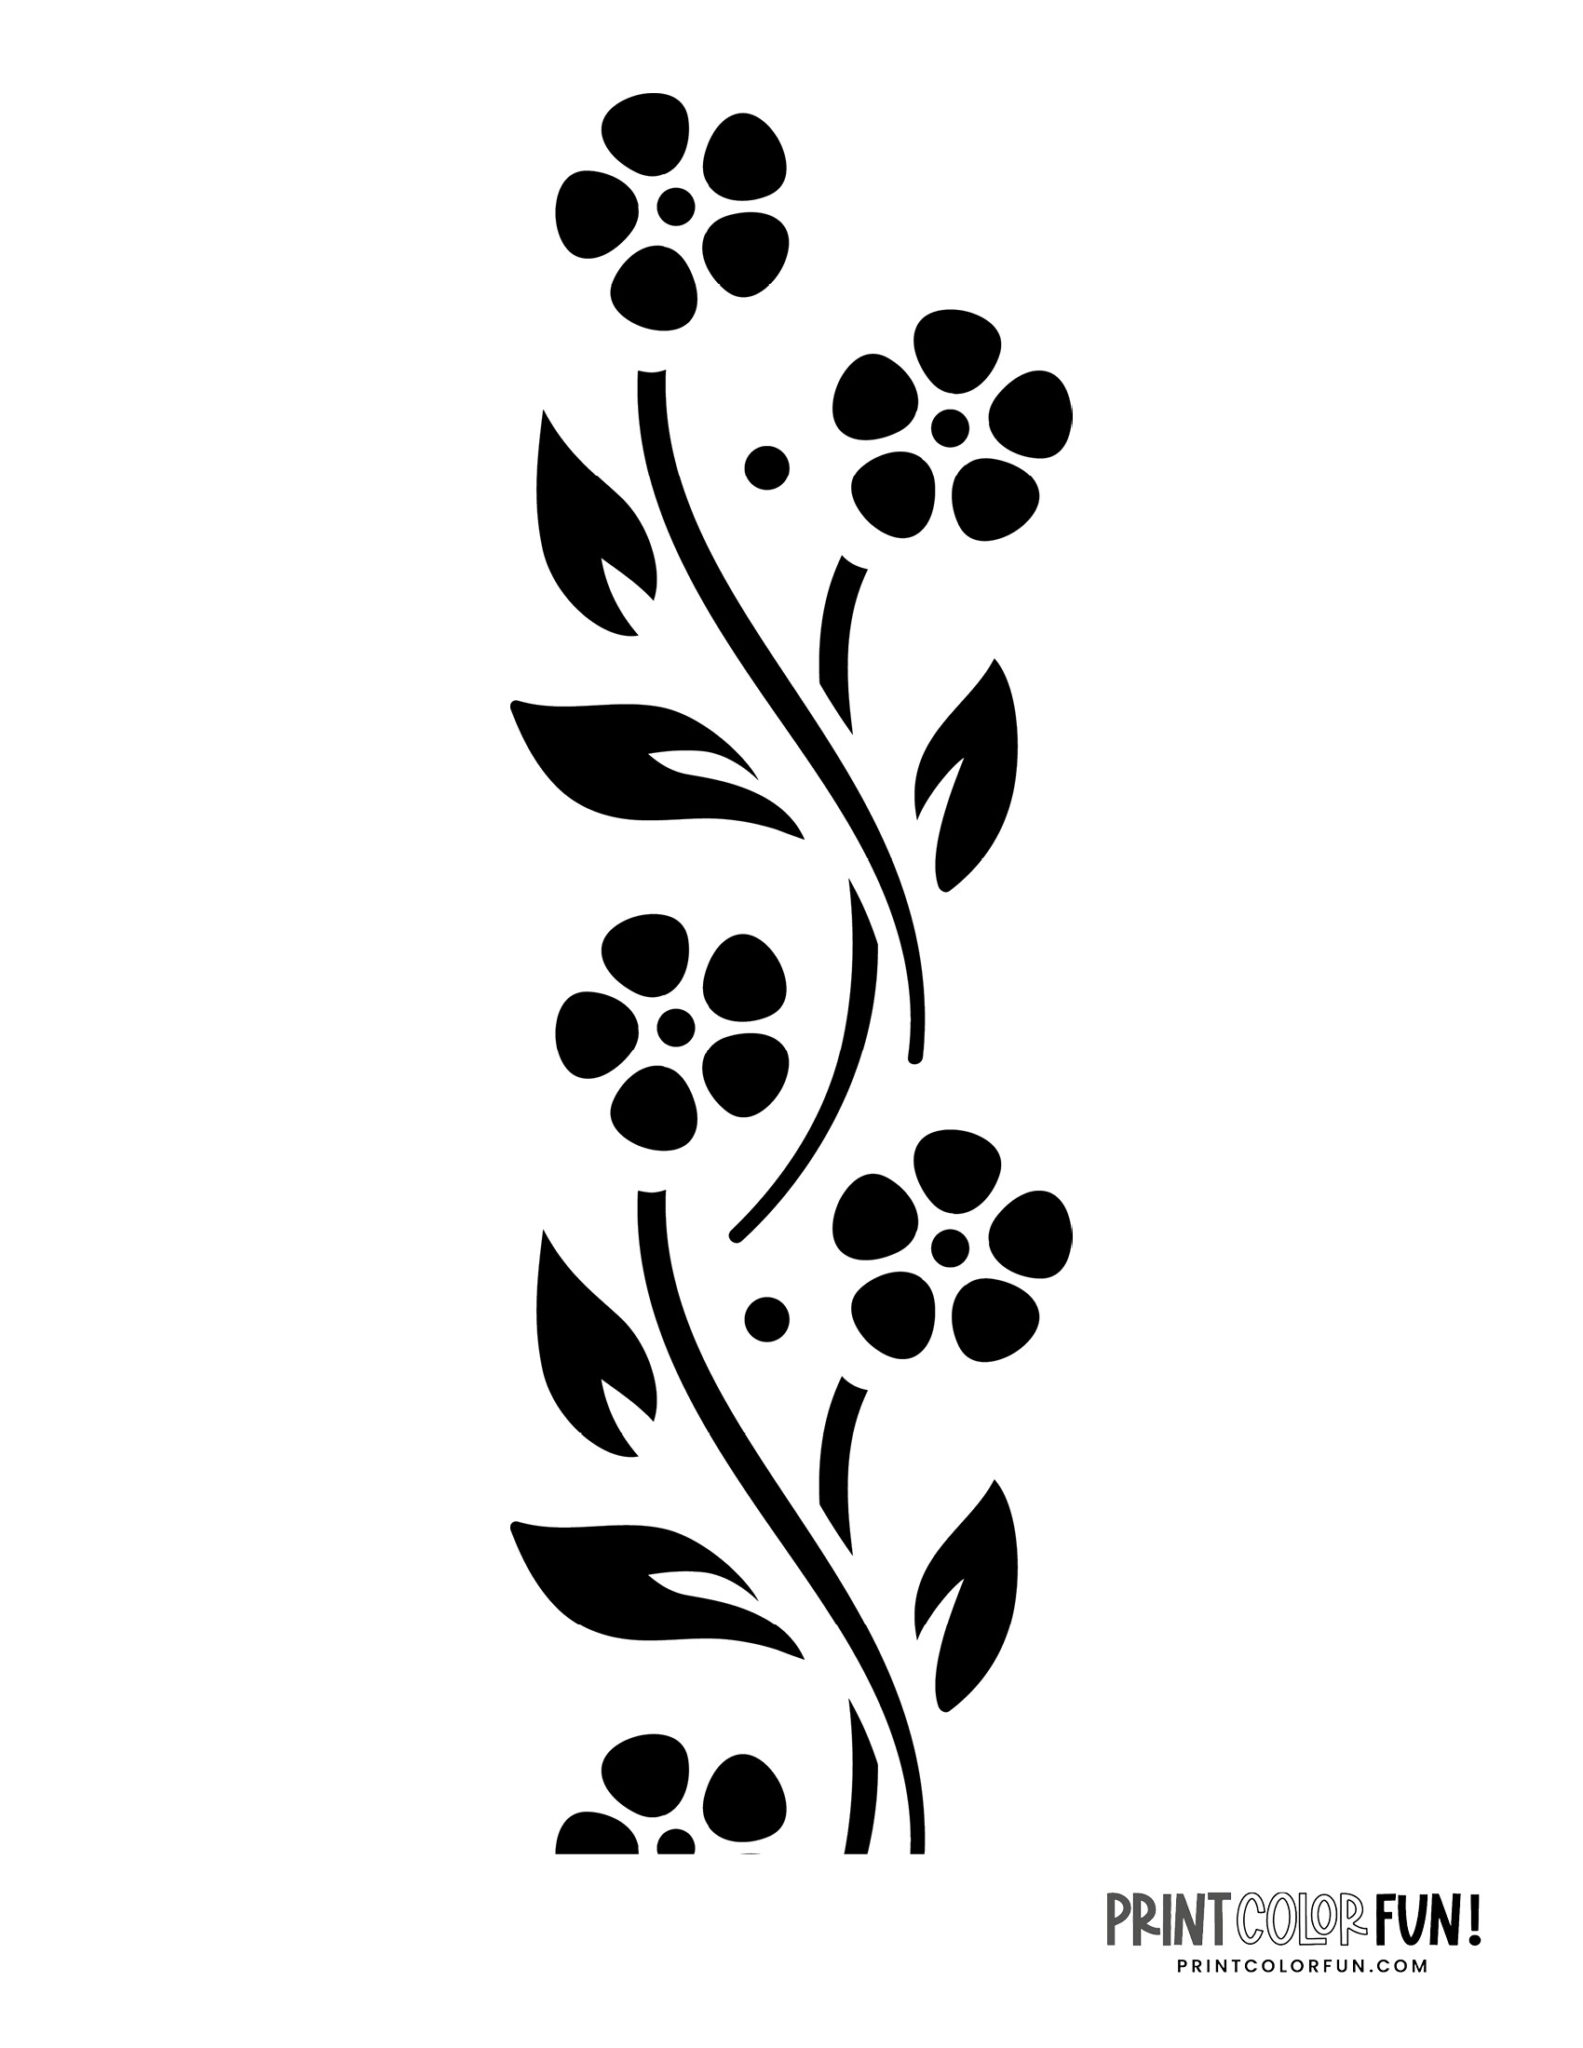 10 Free Flower Stencil Designs For Printing And Craft Projects Print